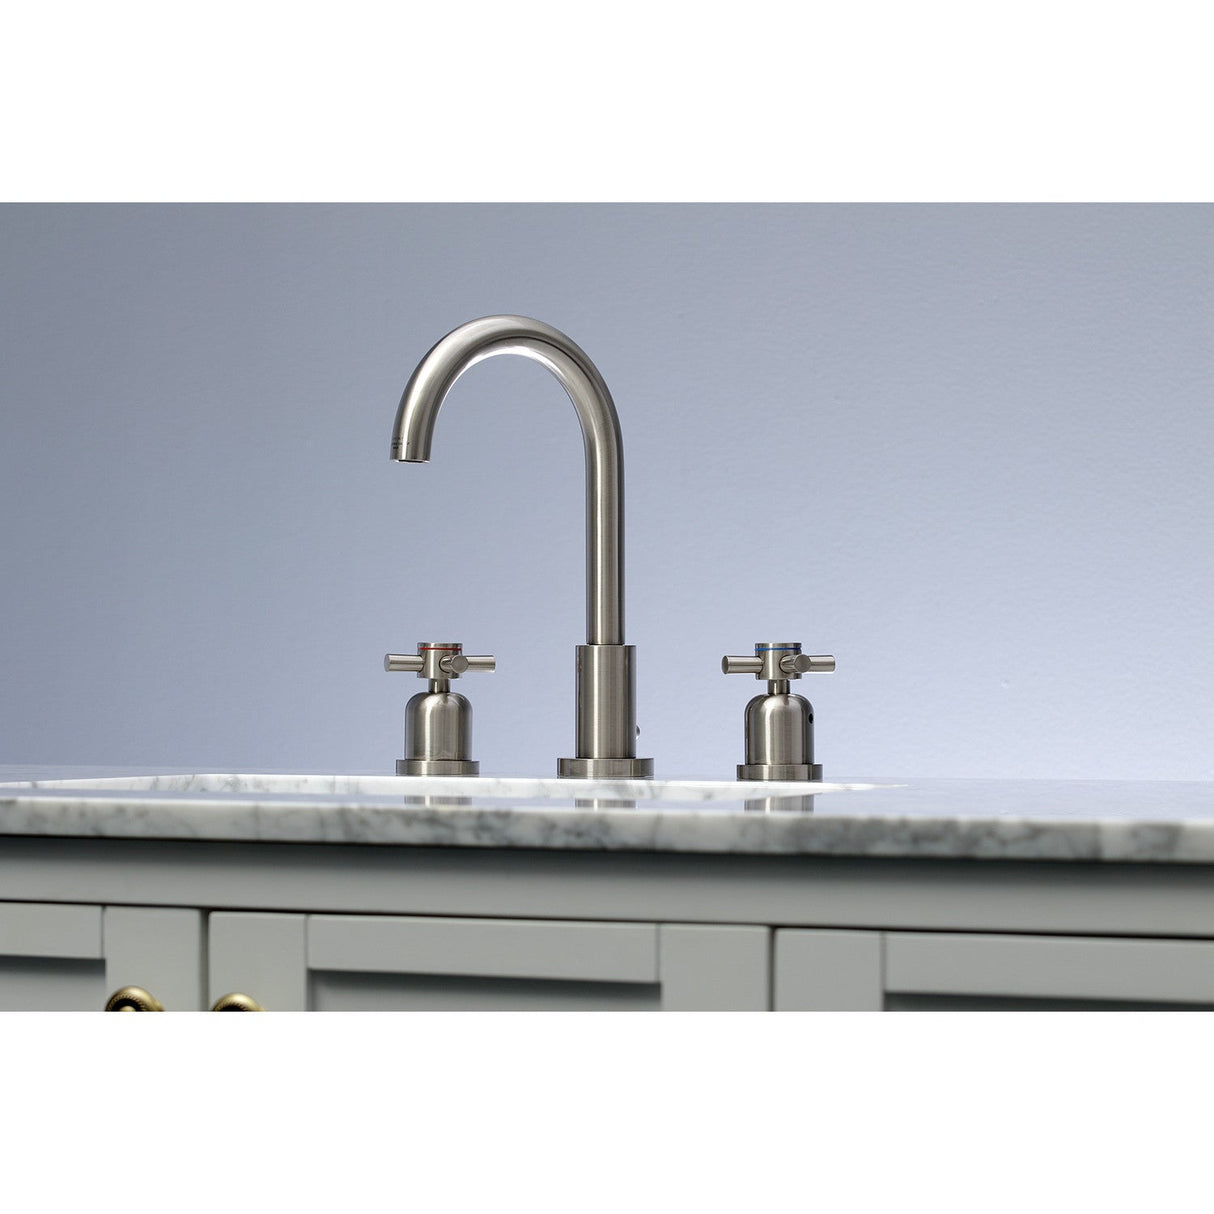 Concord FSC8928DX Two-Handle 3-Hole Deck Mount Widespread Bathroom Faucet with Pop-Up Drain, Brushed Nickel